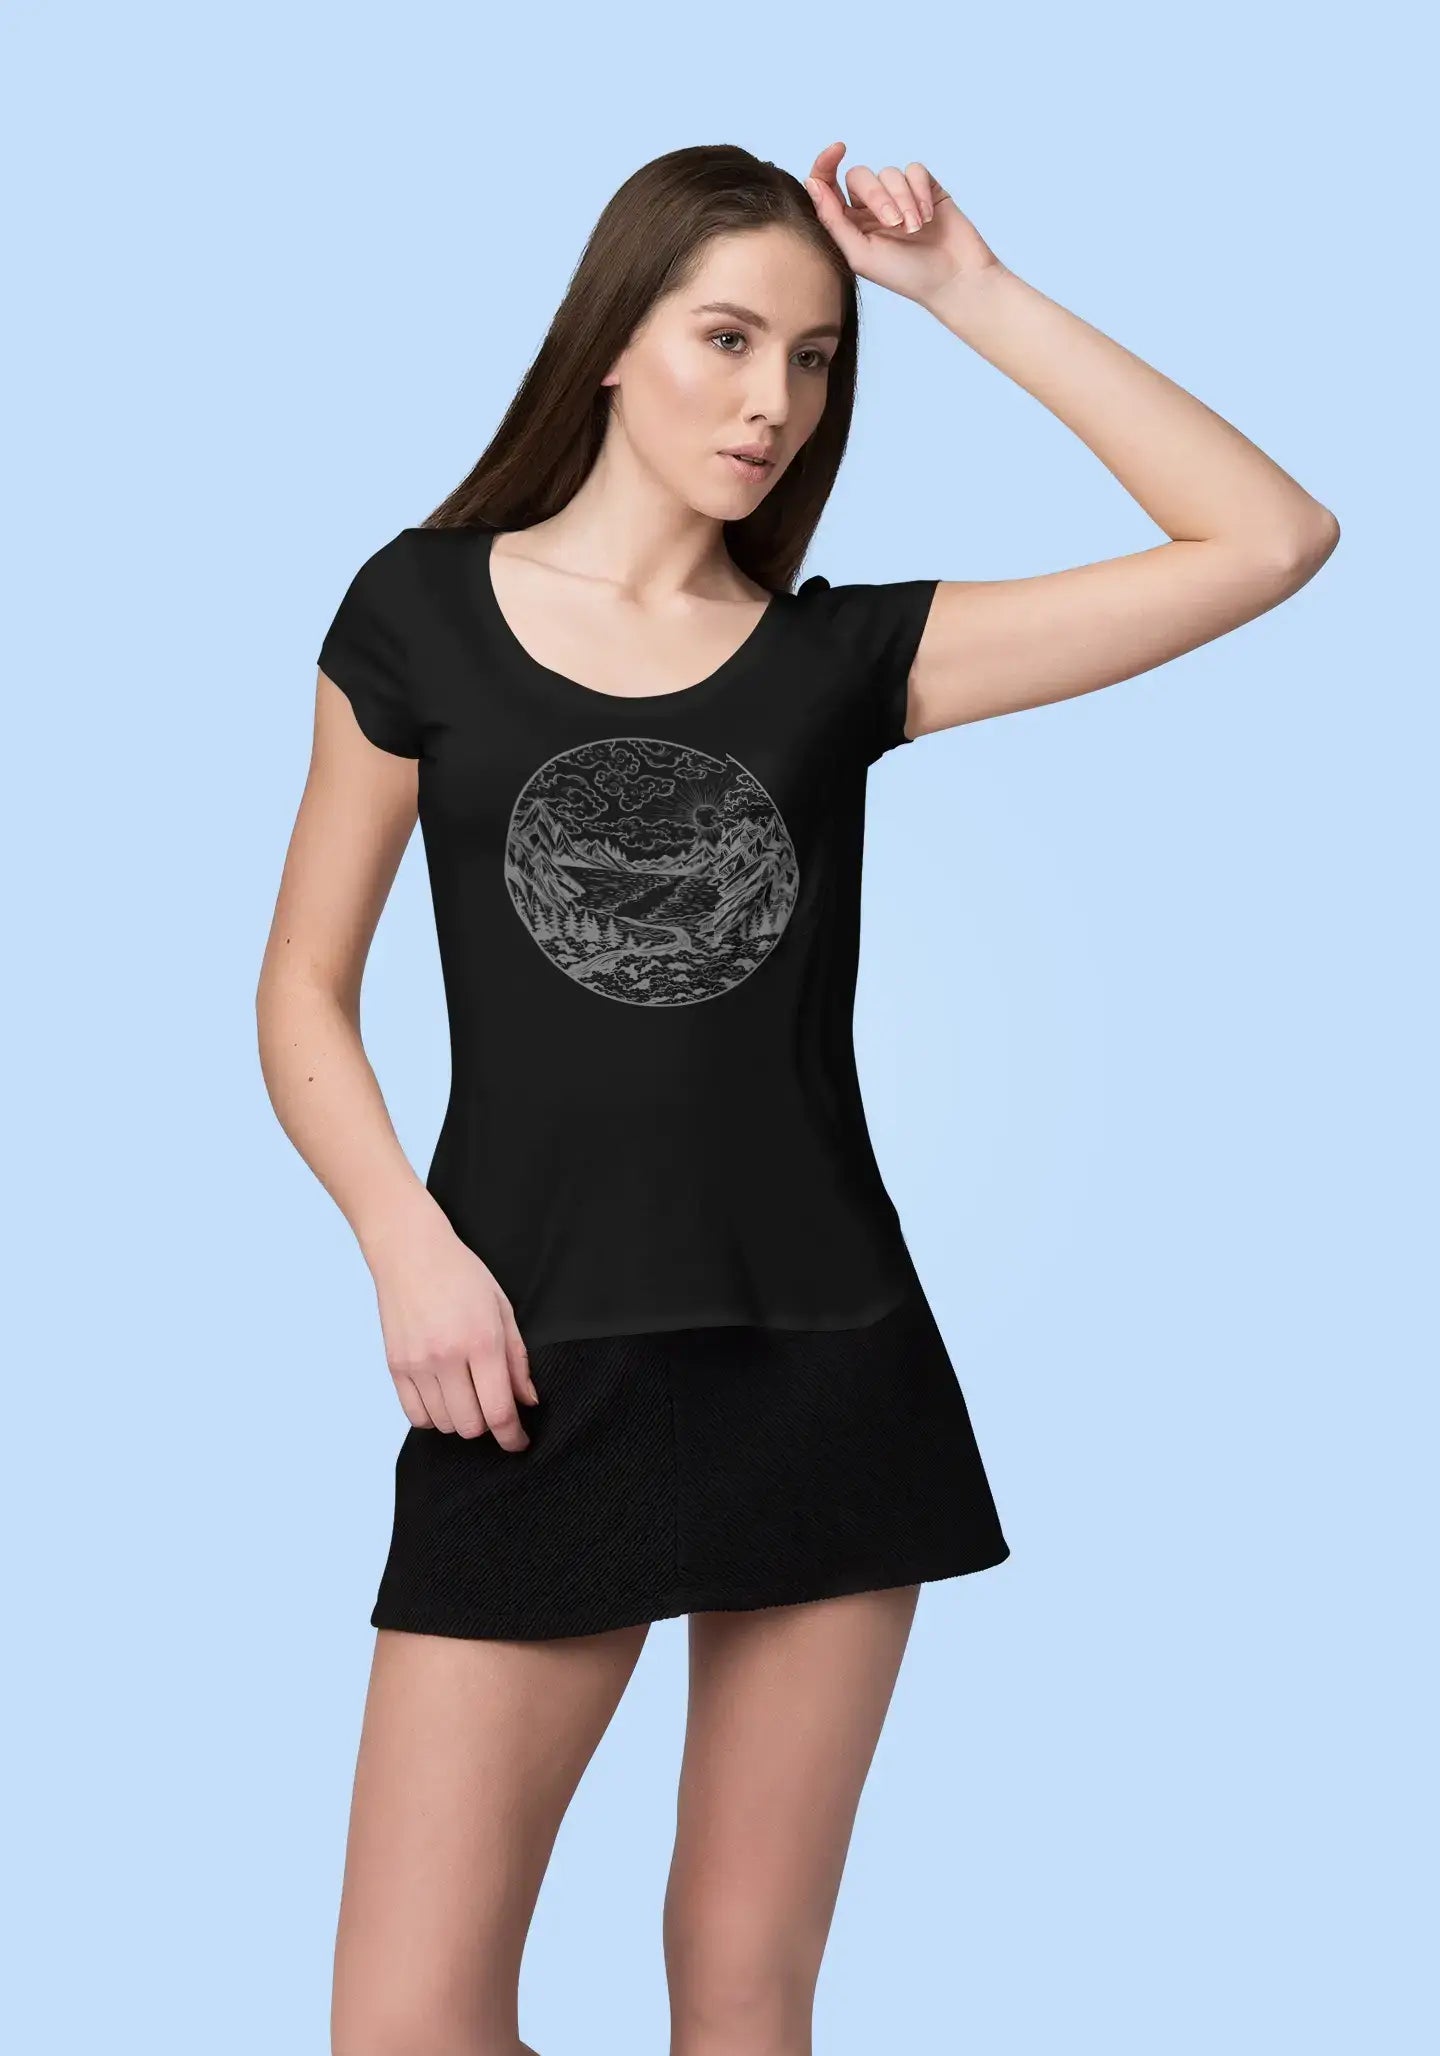 ULTRABASIC - Graphic Printed Women's River Mountain and Forest T-Shirt Deep Black